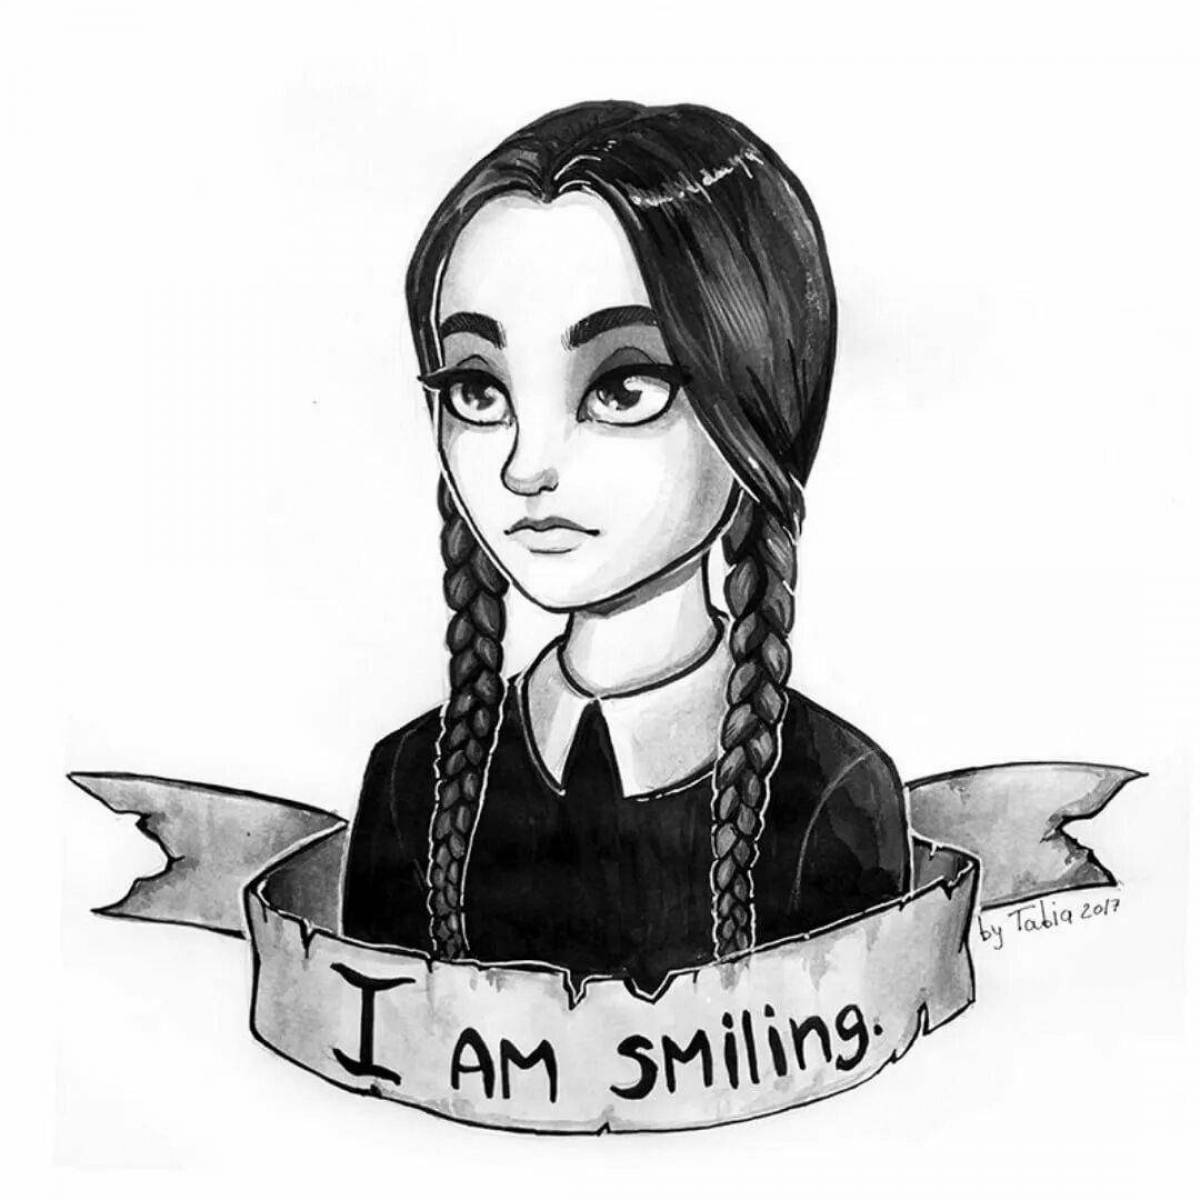 Glitter Addams Wednesday coloring page